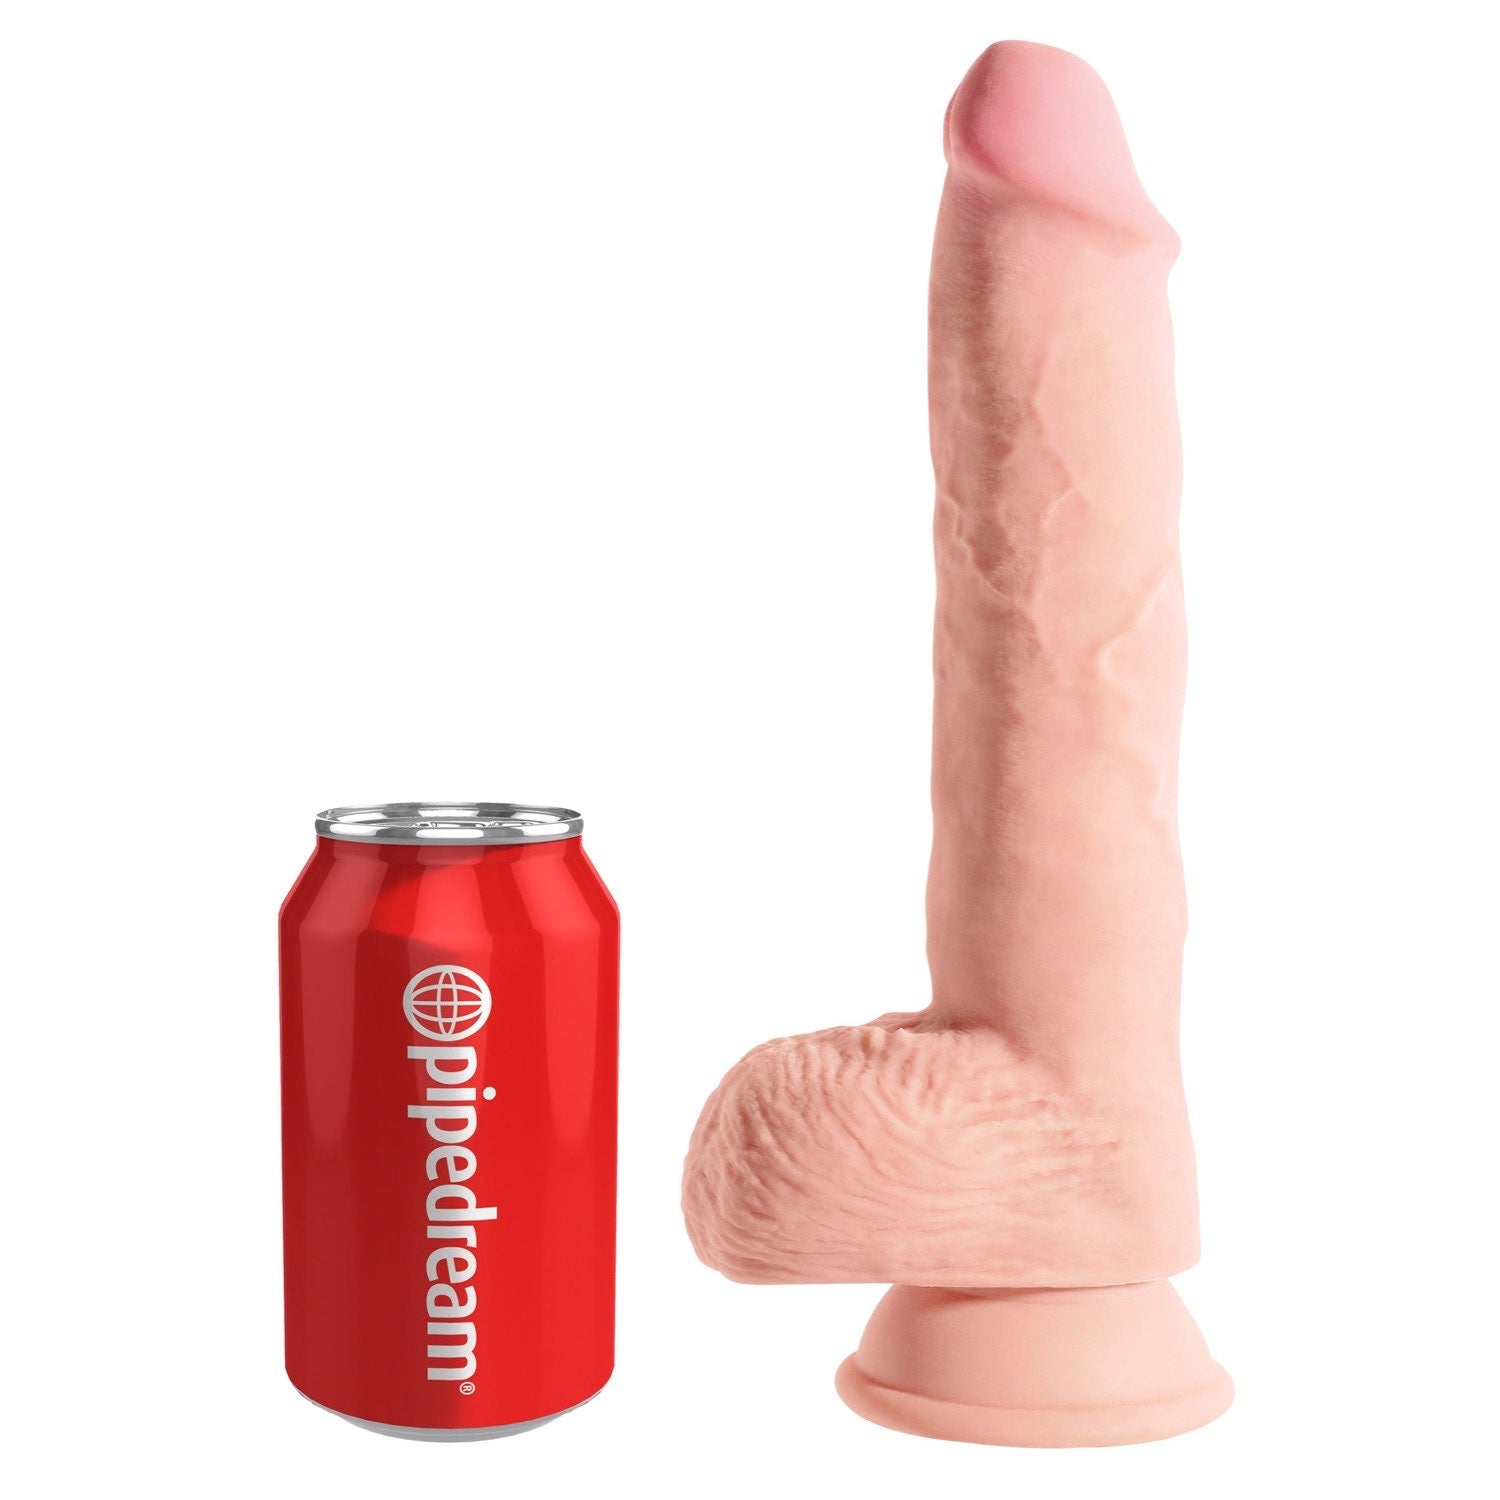 King Cock Plus 10&quot; Triple Density Fat Cock with Balls - Flesh 25 cm Thick Dong by Pipedream